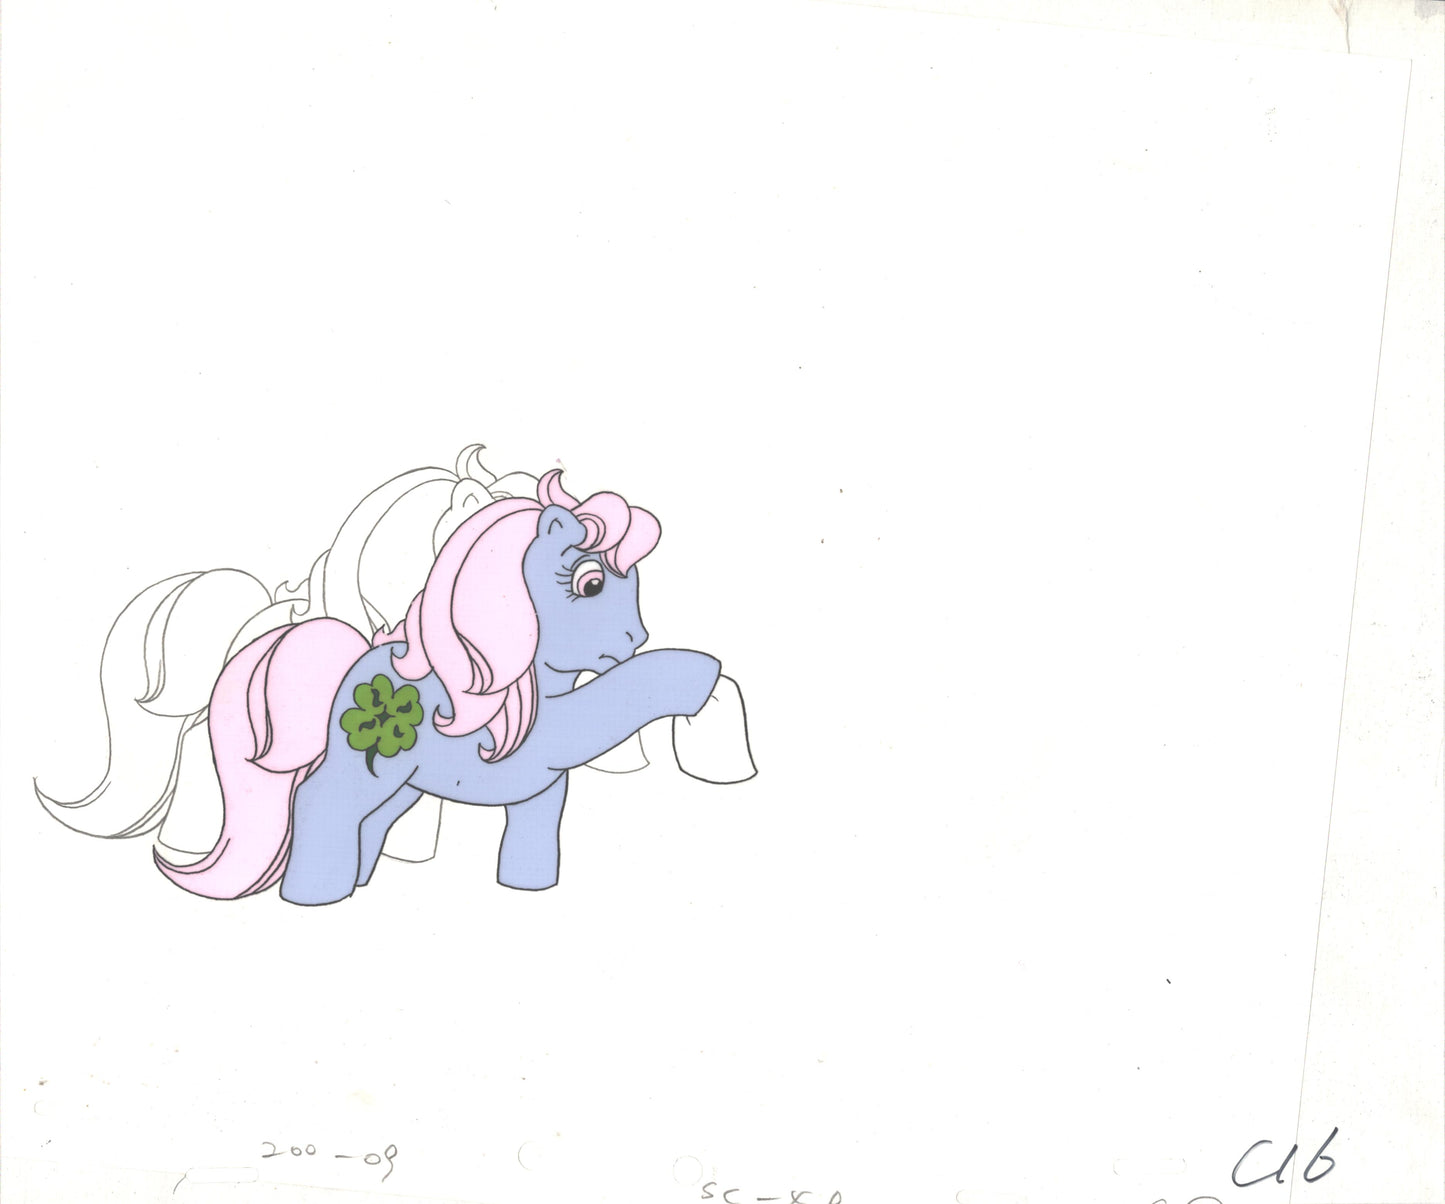 My Little Pony Original Production Animation Cel Hasbro Sunbow 1980s or 90s Used to Make the Cartoon J-C16